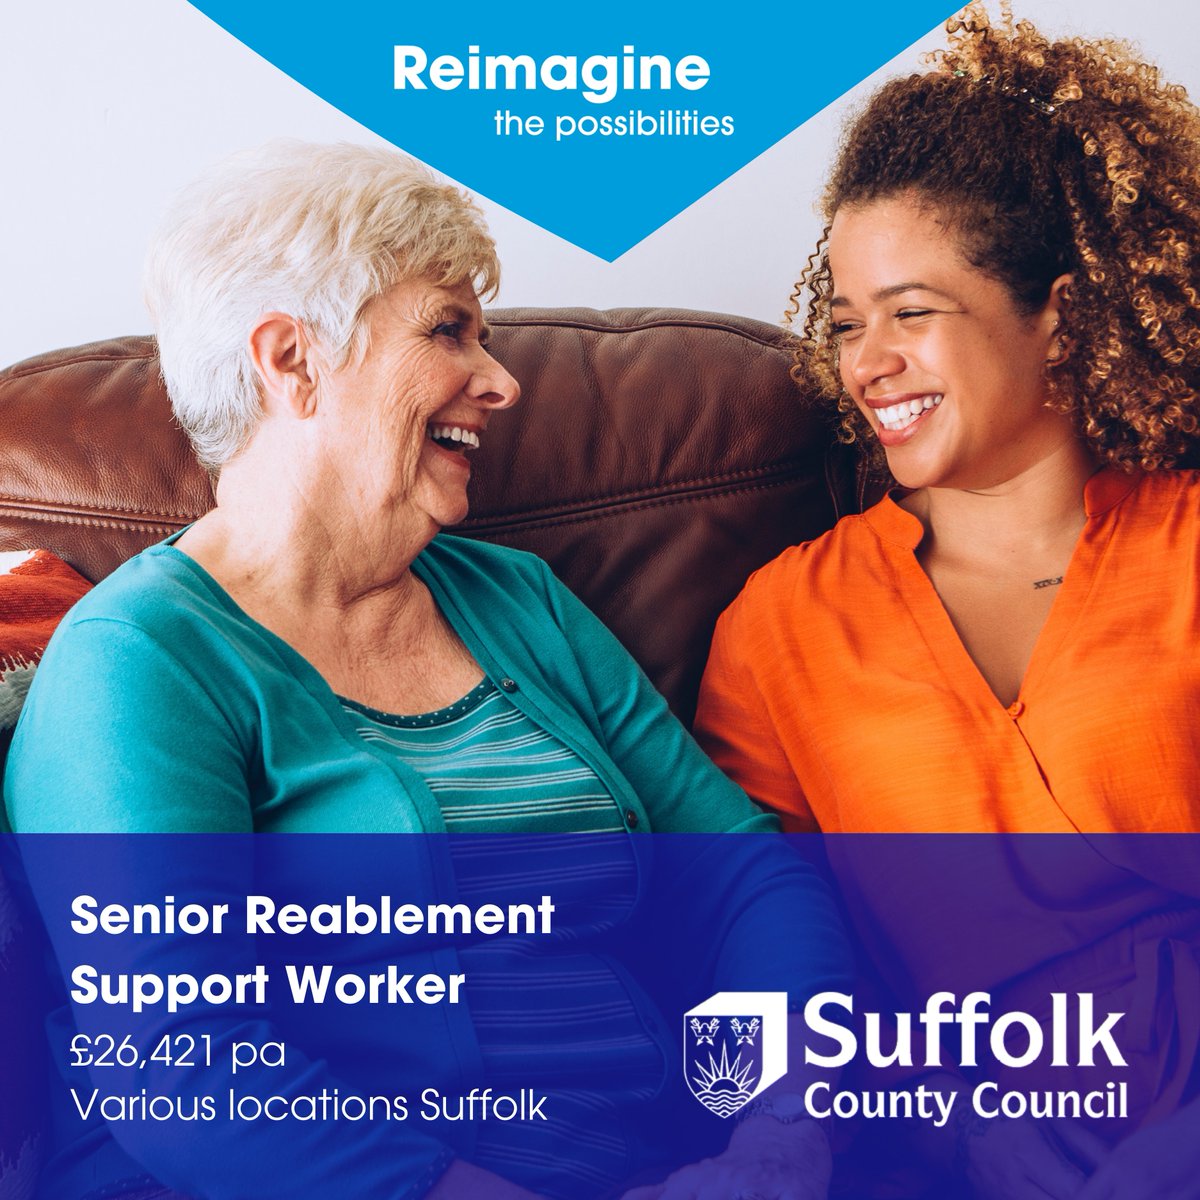 Senior Reablement Support Worker
Suffolk County Council - Landmark House, West Suffolk House

For more information and to apply for this job, please visit: suffolkjobsdirect.org/#en/sites/CX_1…

#IpswichJobs #BuryStEdmundsJobs #suffolkjobs #suffolkjobsdirect @JCPInSuffolk